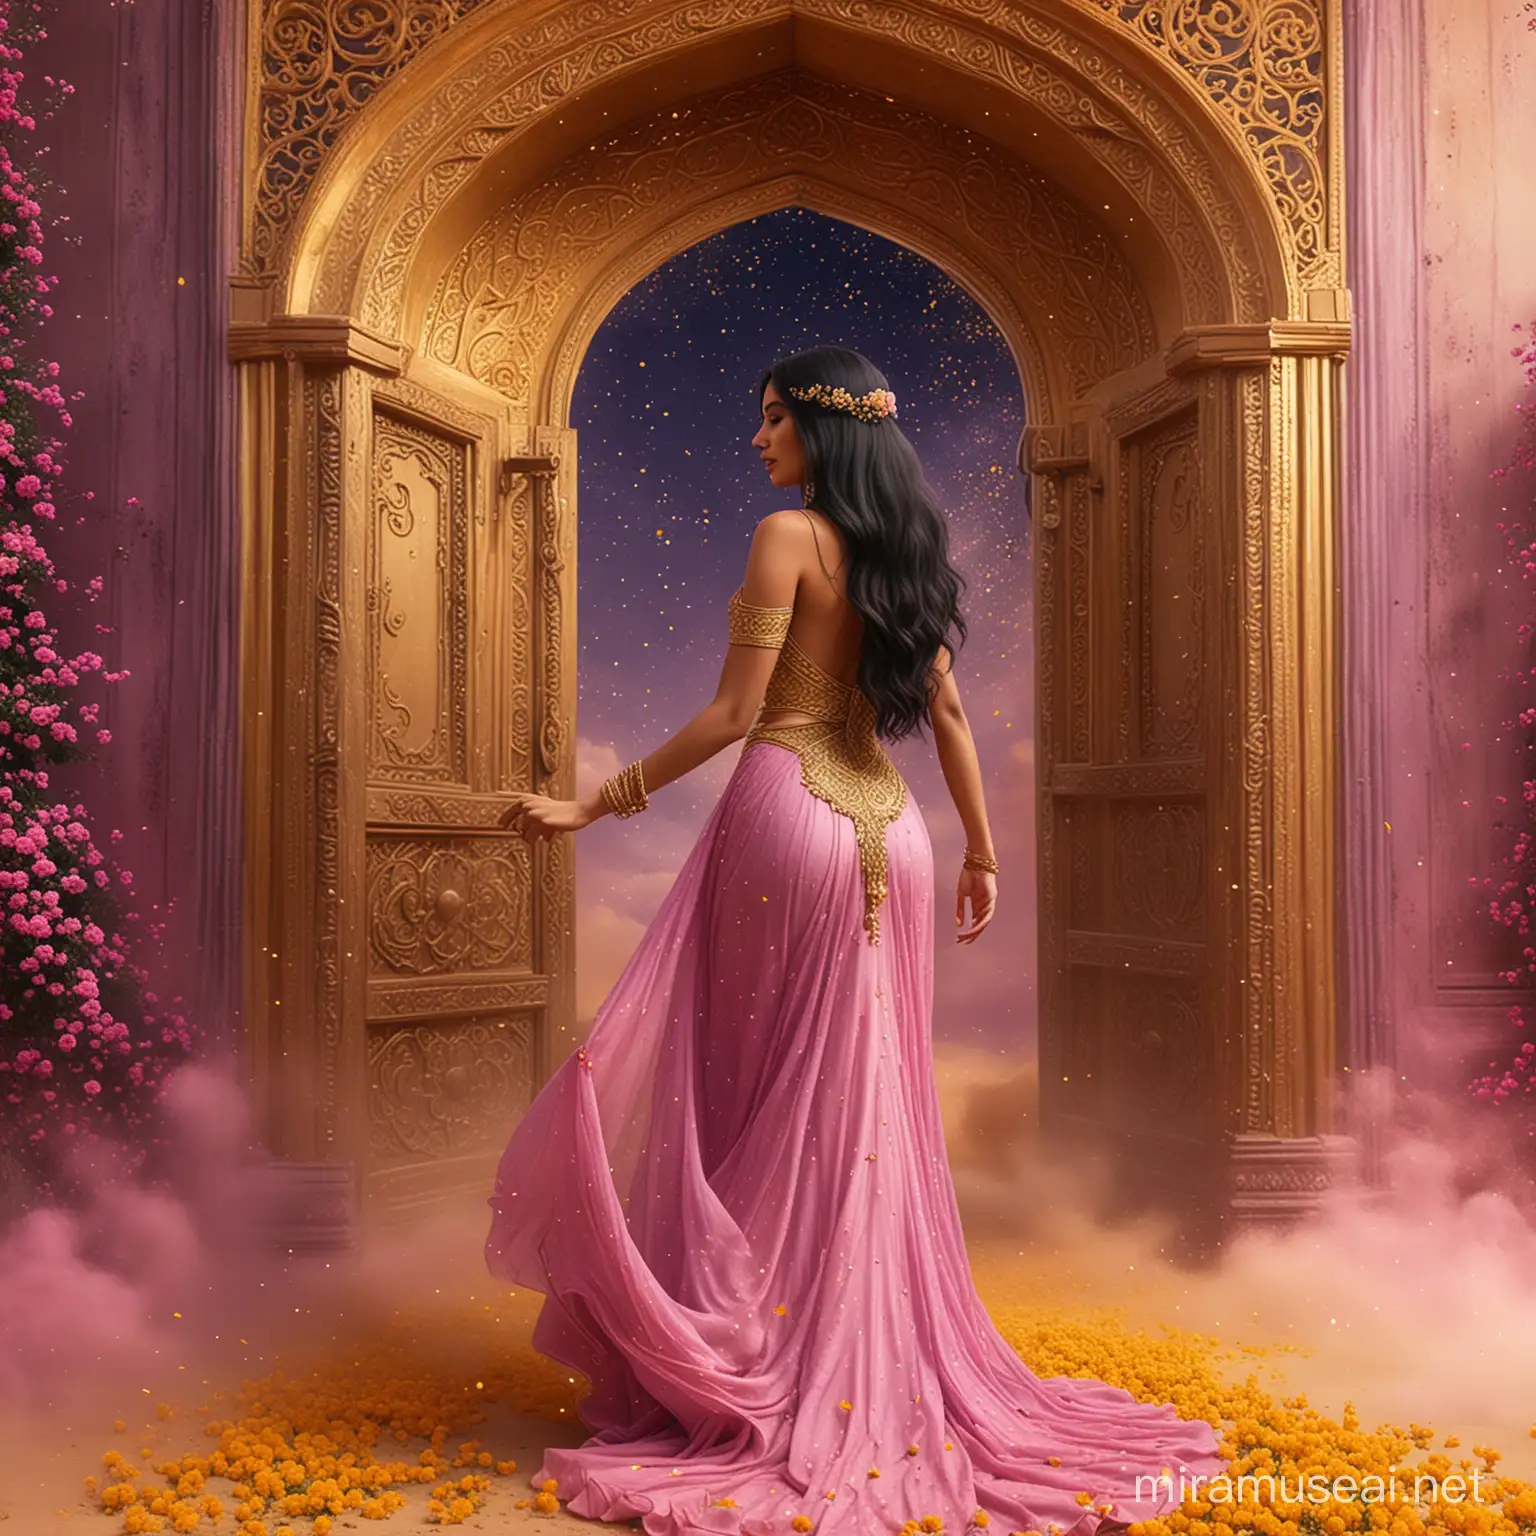 A beautiful woman, from behind, standing up under a huge opened golden arabian door, following the fairy whisper, surrounded by dark pink dust and small dark yellow flowers. Long wavy black hair. Elegant long purple dress, haute couture, sari dress. Background Yellow and pink nebula. Focus the huge golden arabian door. 8k, fantasy, illustration, digital art, illustration art, fantasy art, fantasy style